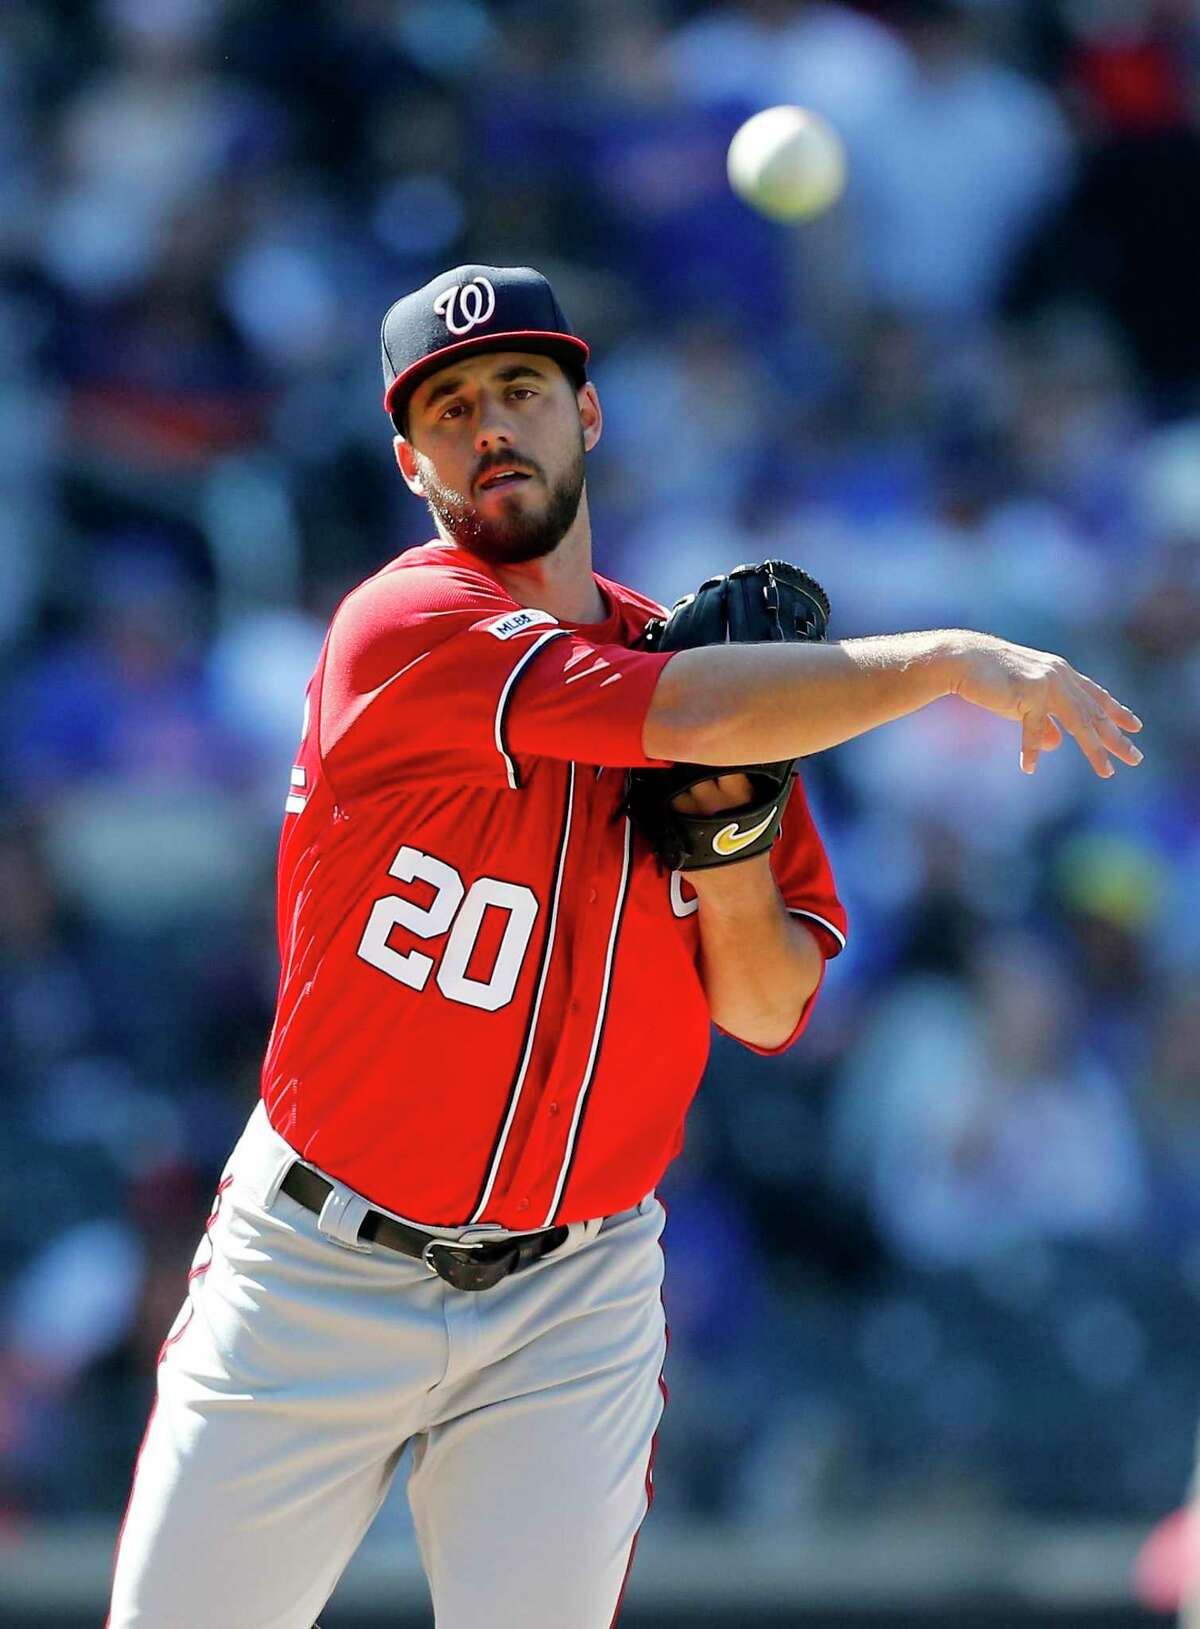 NEW YORK, NEW YORK - APRIL 06: Kyle Barraclough #20 of the Washington Nationals in action against the New York Mets at Citi Field on April 06, 2019 in the Flushing neighborhood of the Queens borough of New York City. The Mets defeated the Nationals 6-5. (Photo by Jim McIsaac/Getty Images)